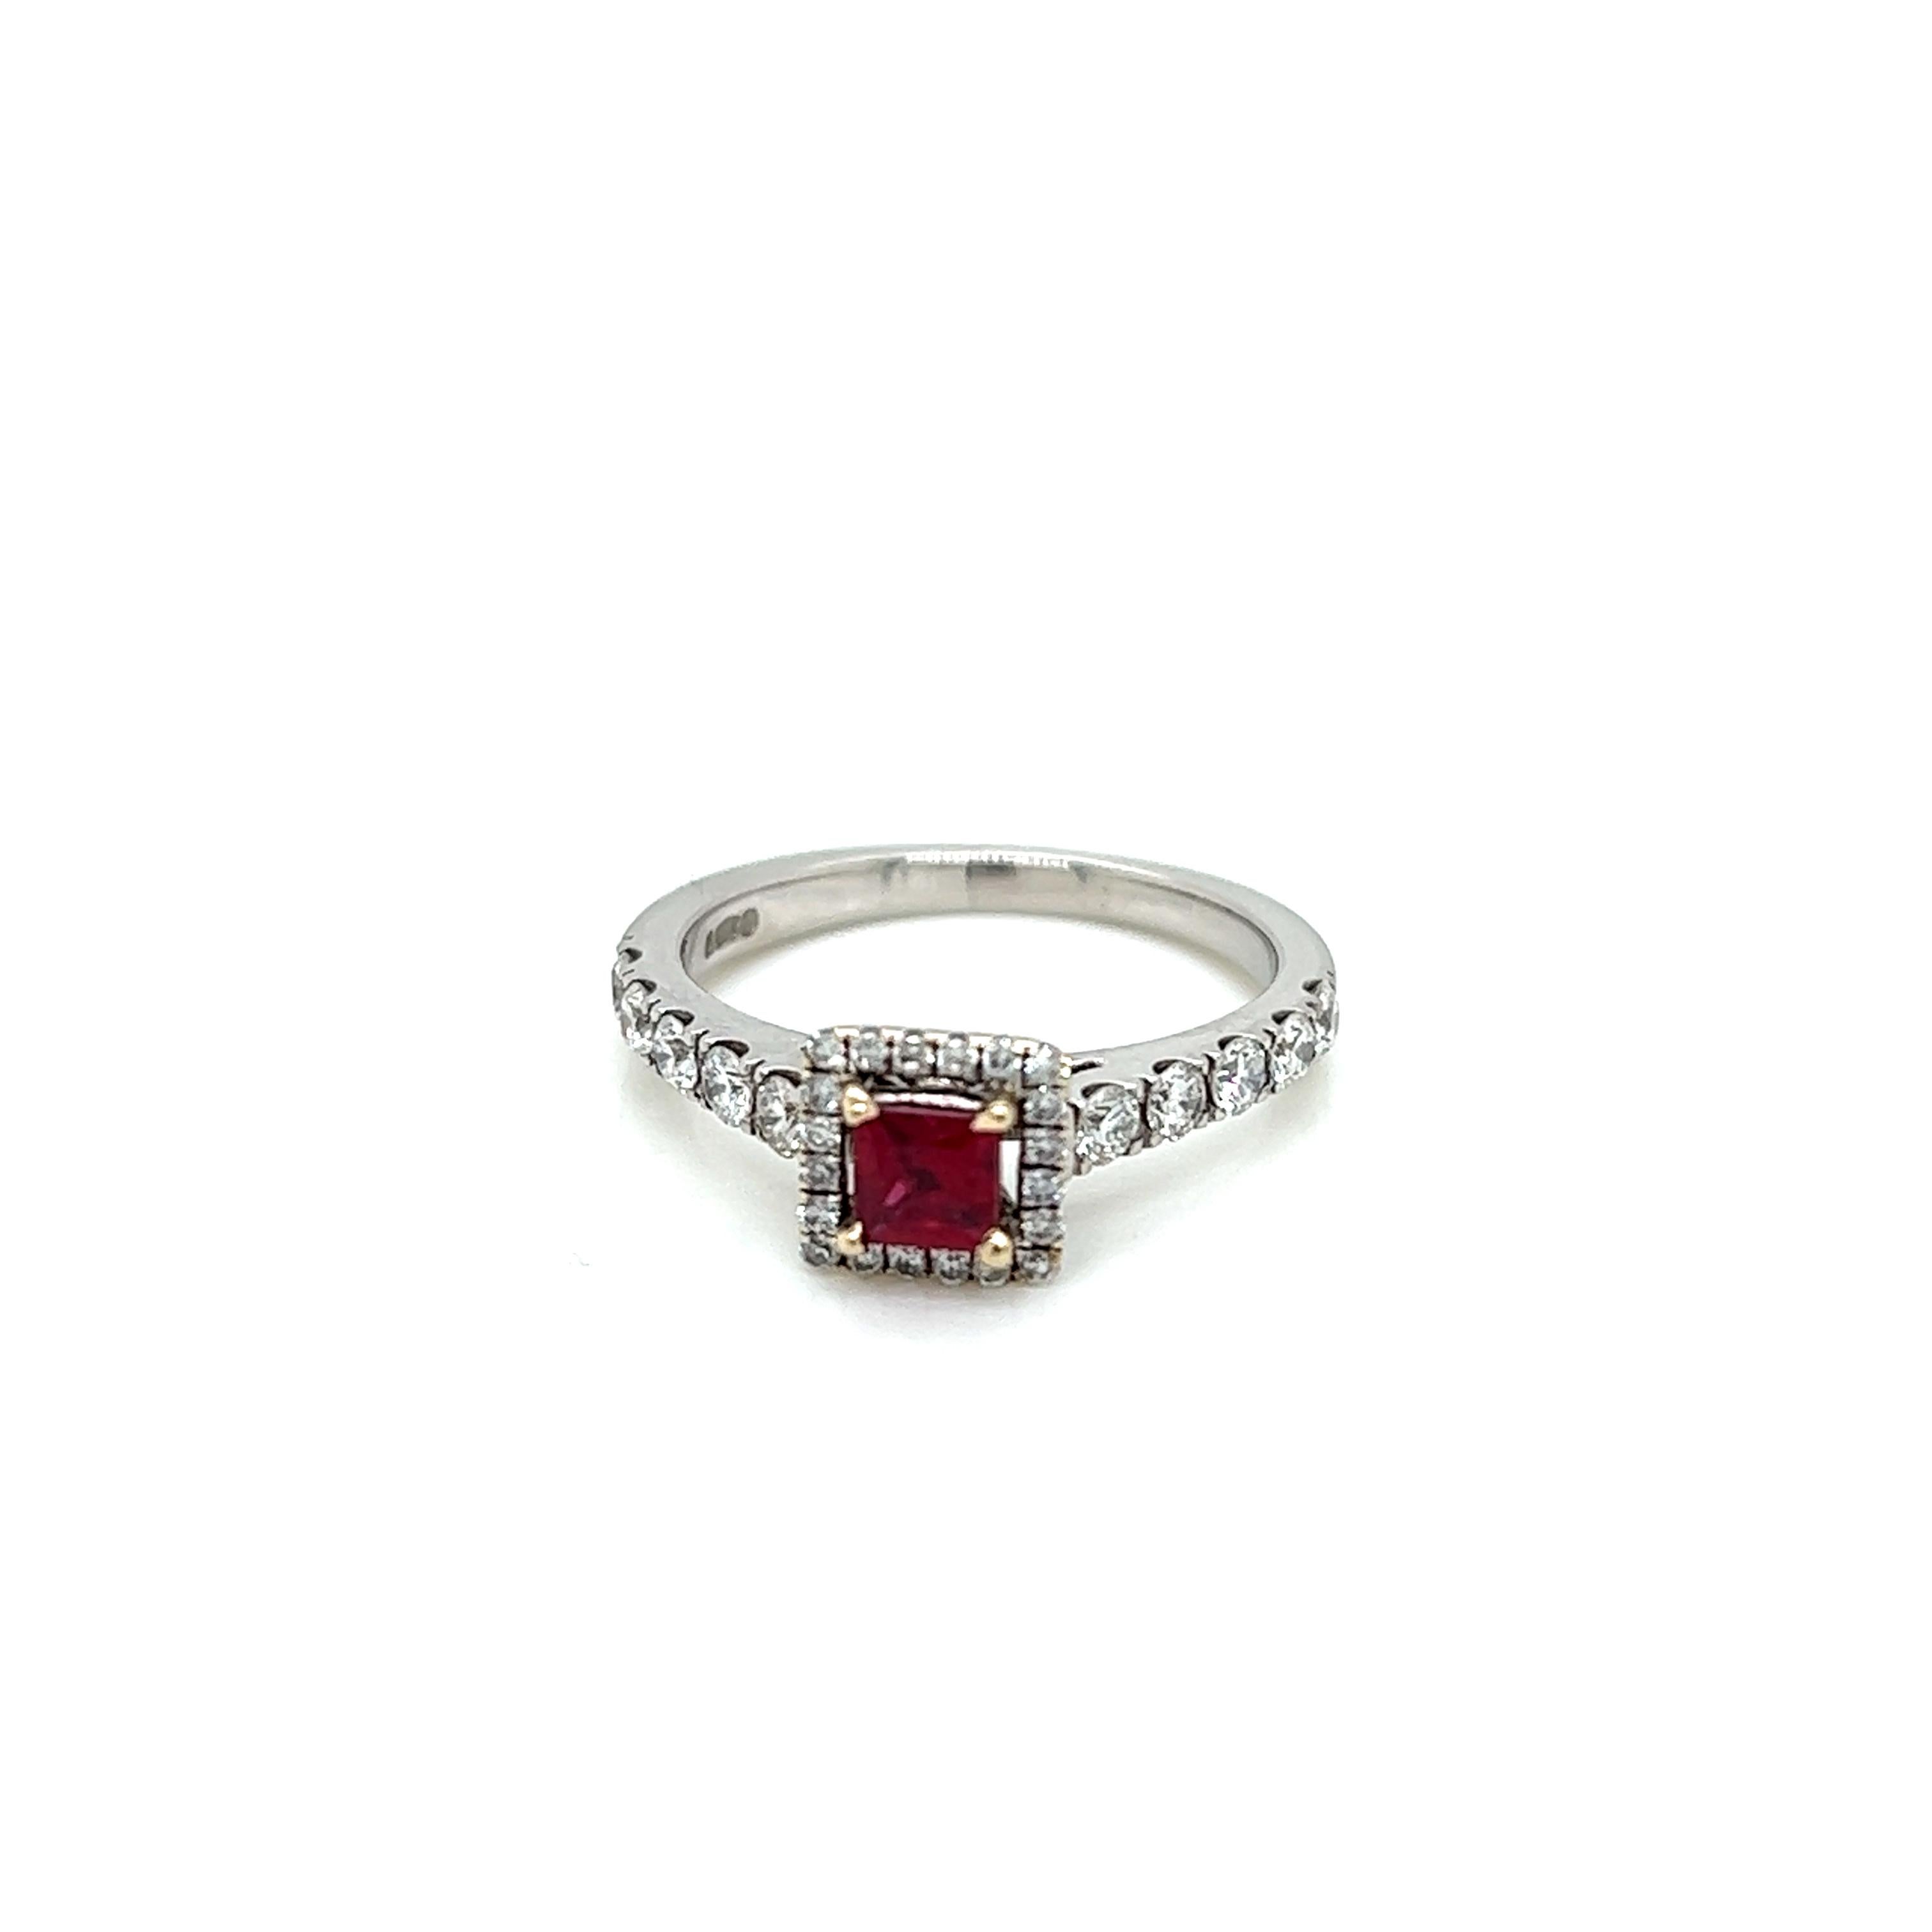 This ring features a spectacular 0.27 carat princess cut Ruby at its centre, surrounded by a frame of round brilliant Diamonds set on a Platinum band with round brilliant shoulder Diamonds.

The Ruby at the centre of this ring is a marvellous deep,